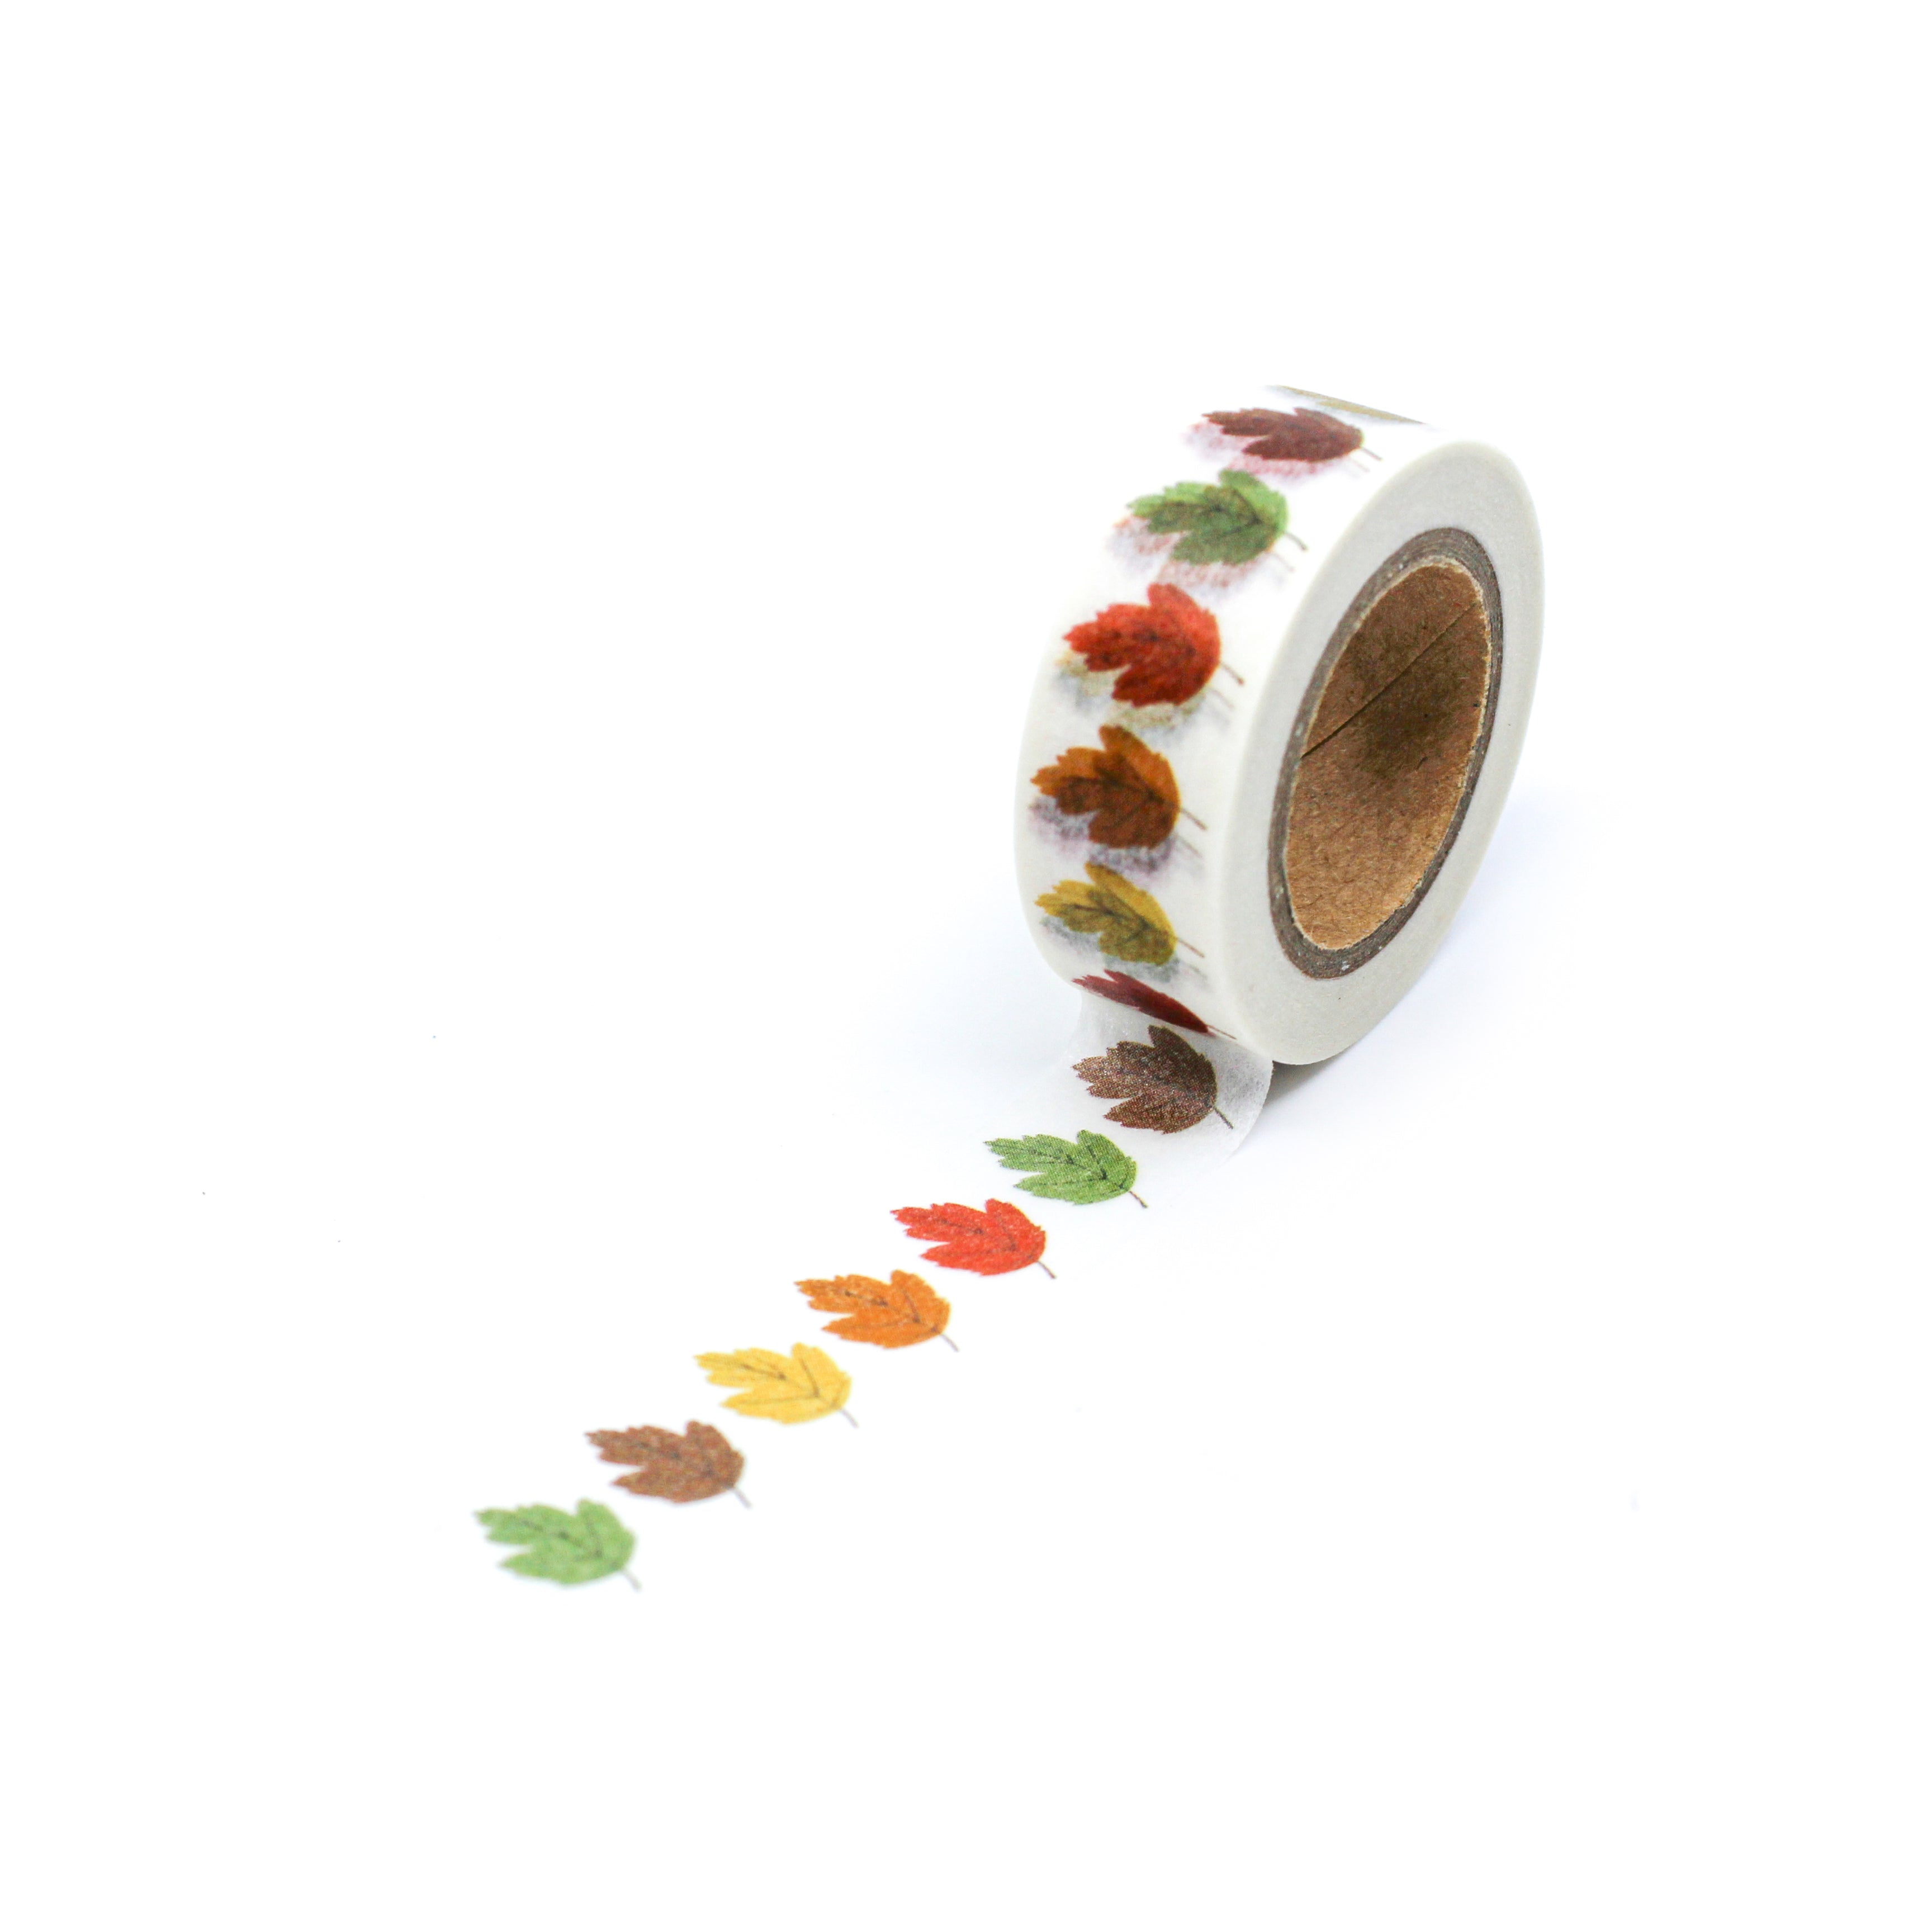 This is a full pattern repeat view of variety of colors of fall leaf washi tape from BBB Supplies Craft Shop